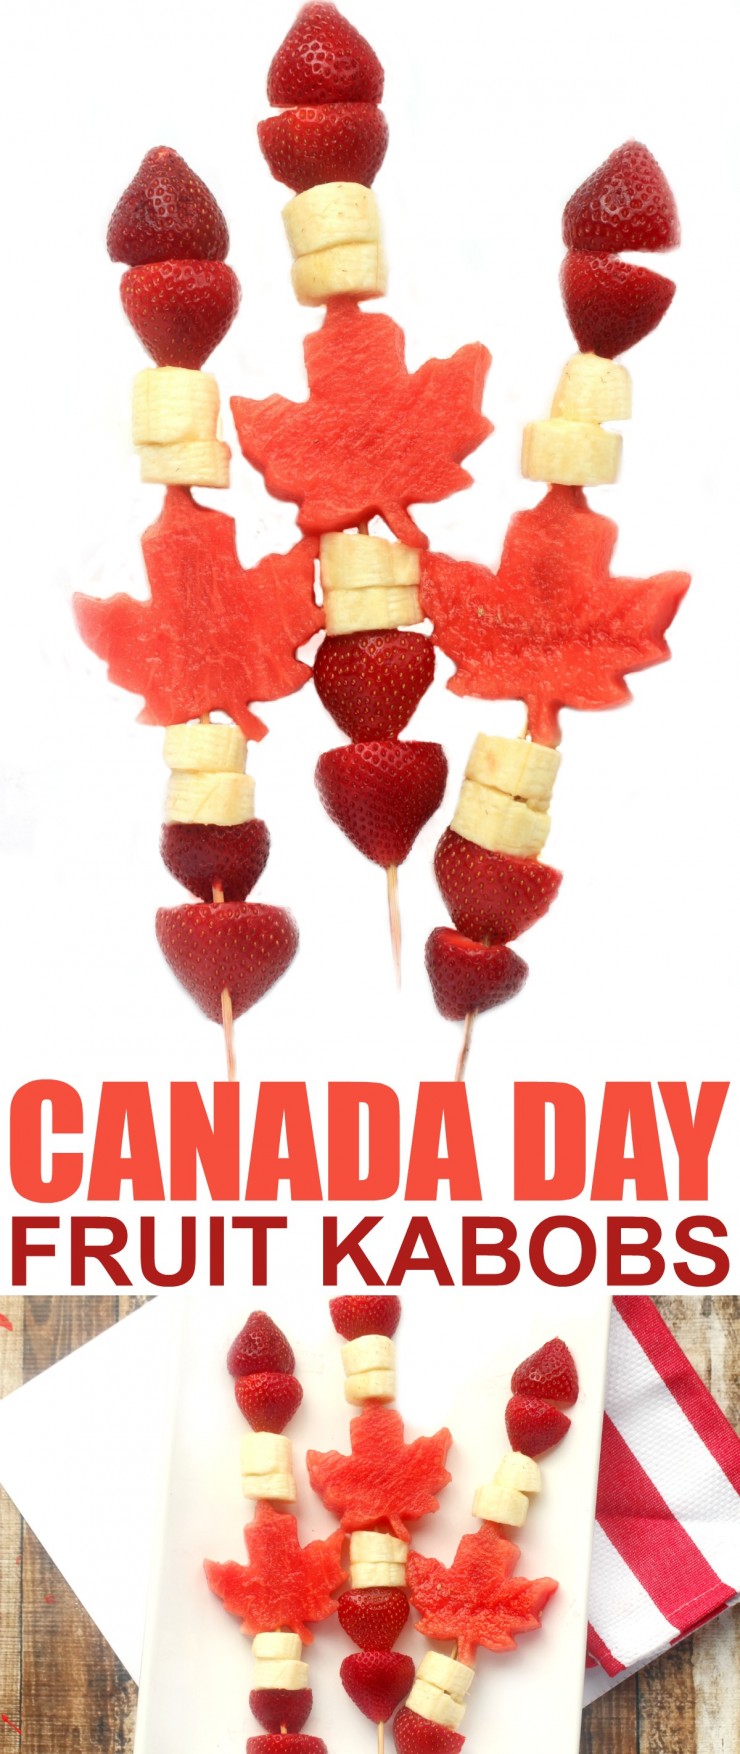 Celebrate Canada Day with this fun and healthy patriotic Canada Day Fruit Kabobs. They are super easy to put together and everyone will love eating them. A perfect addition to your Canada Day celebrations!